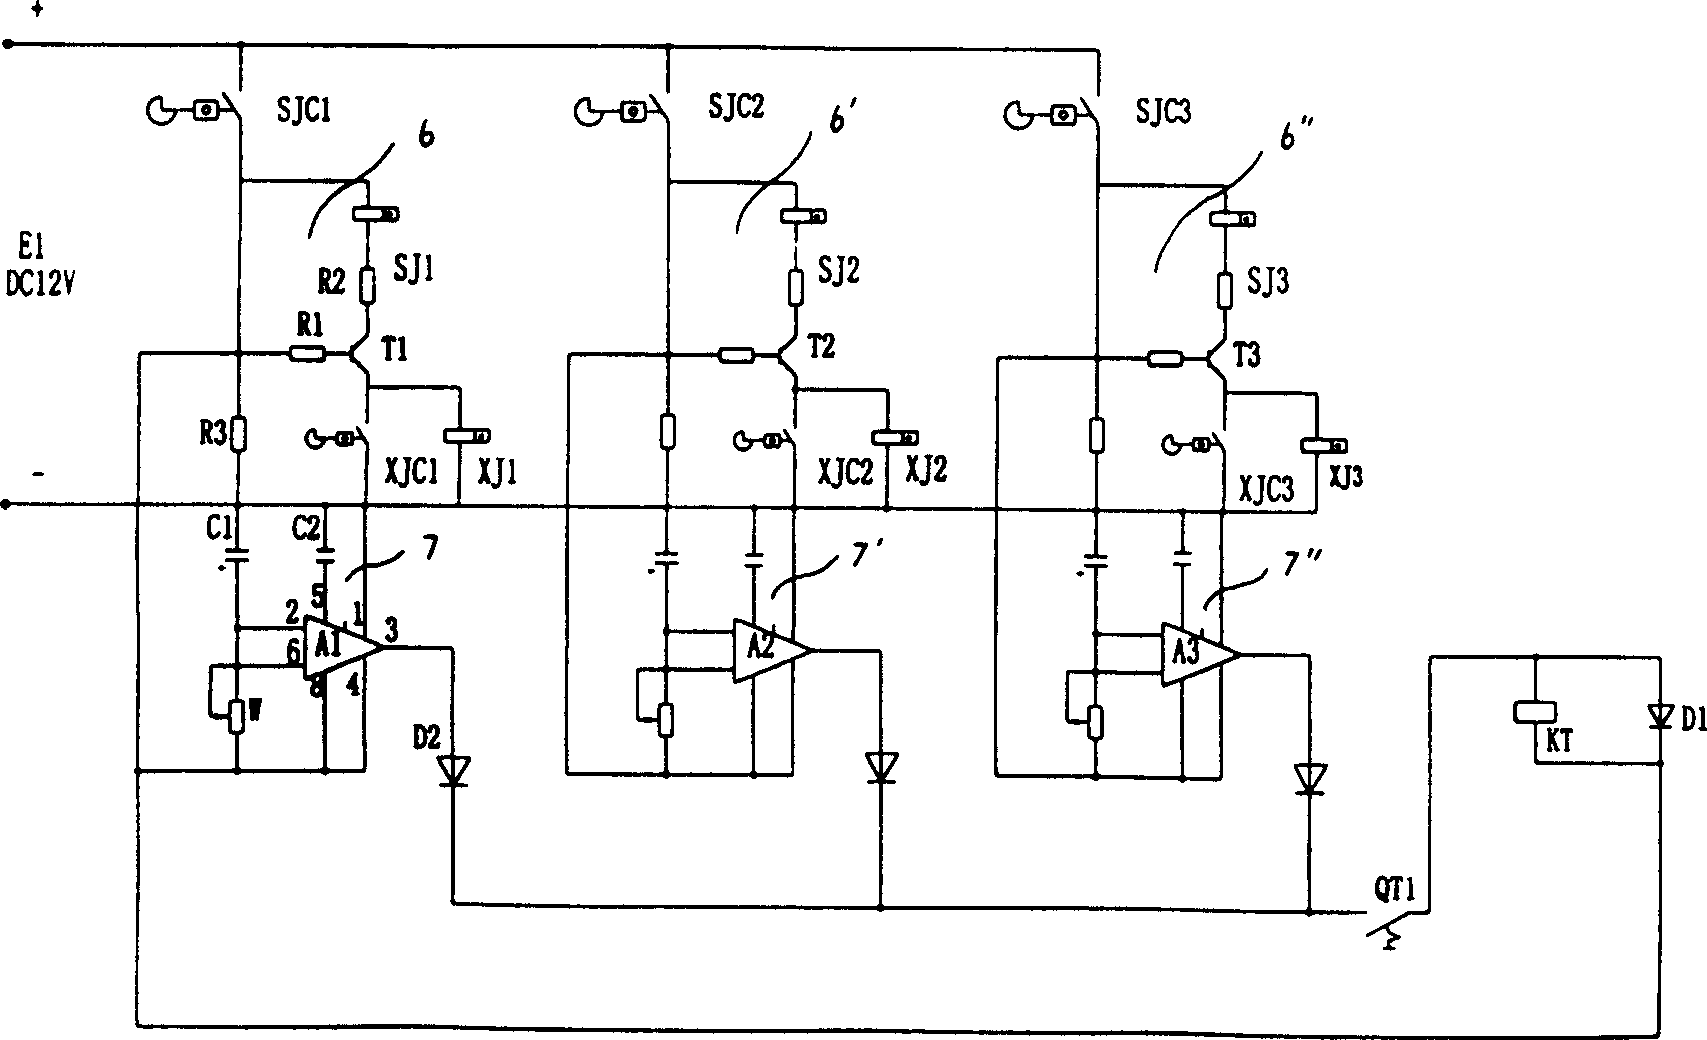 AC-DC electrical contact electricity life testing device and method